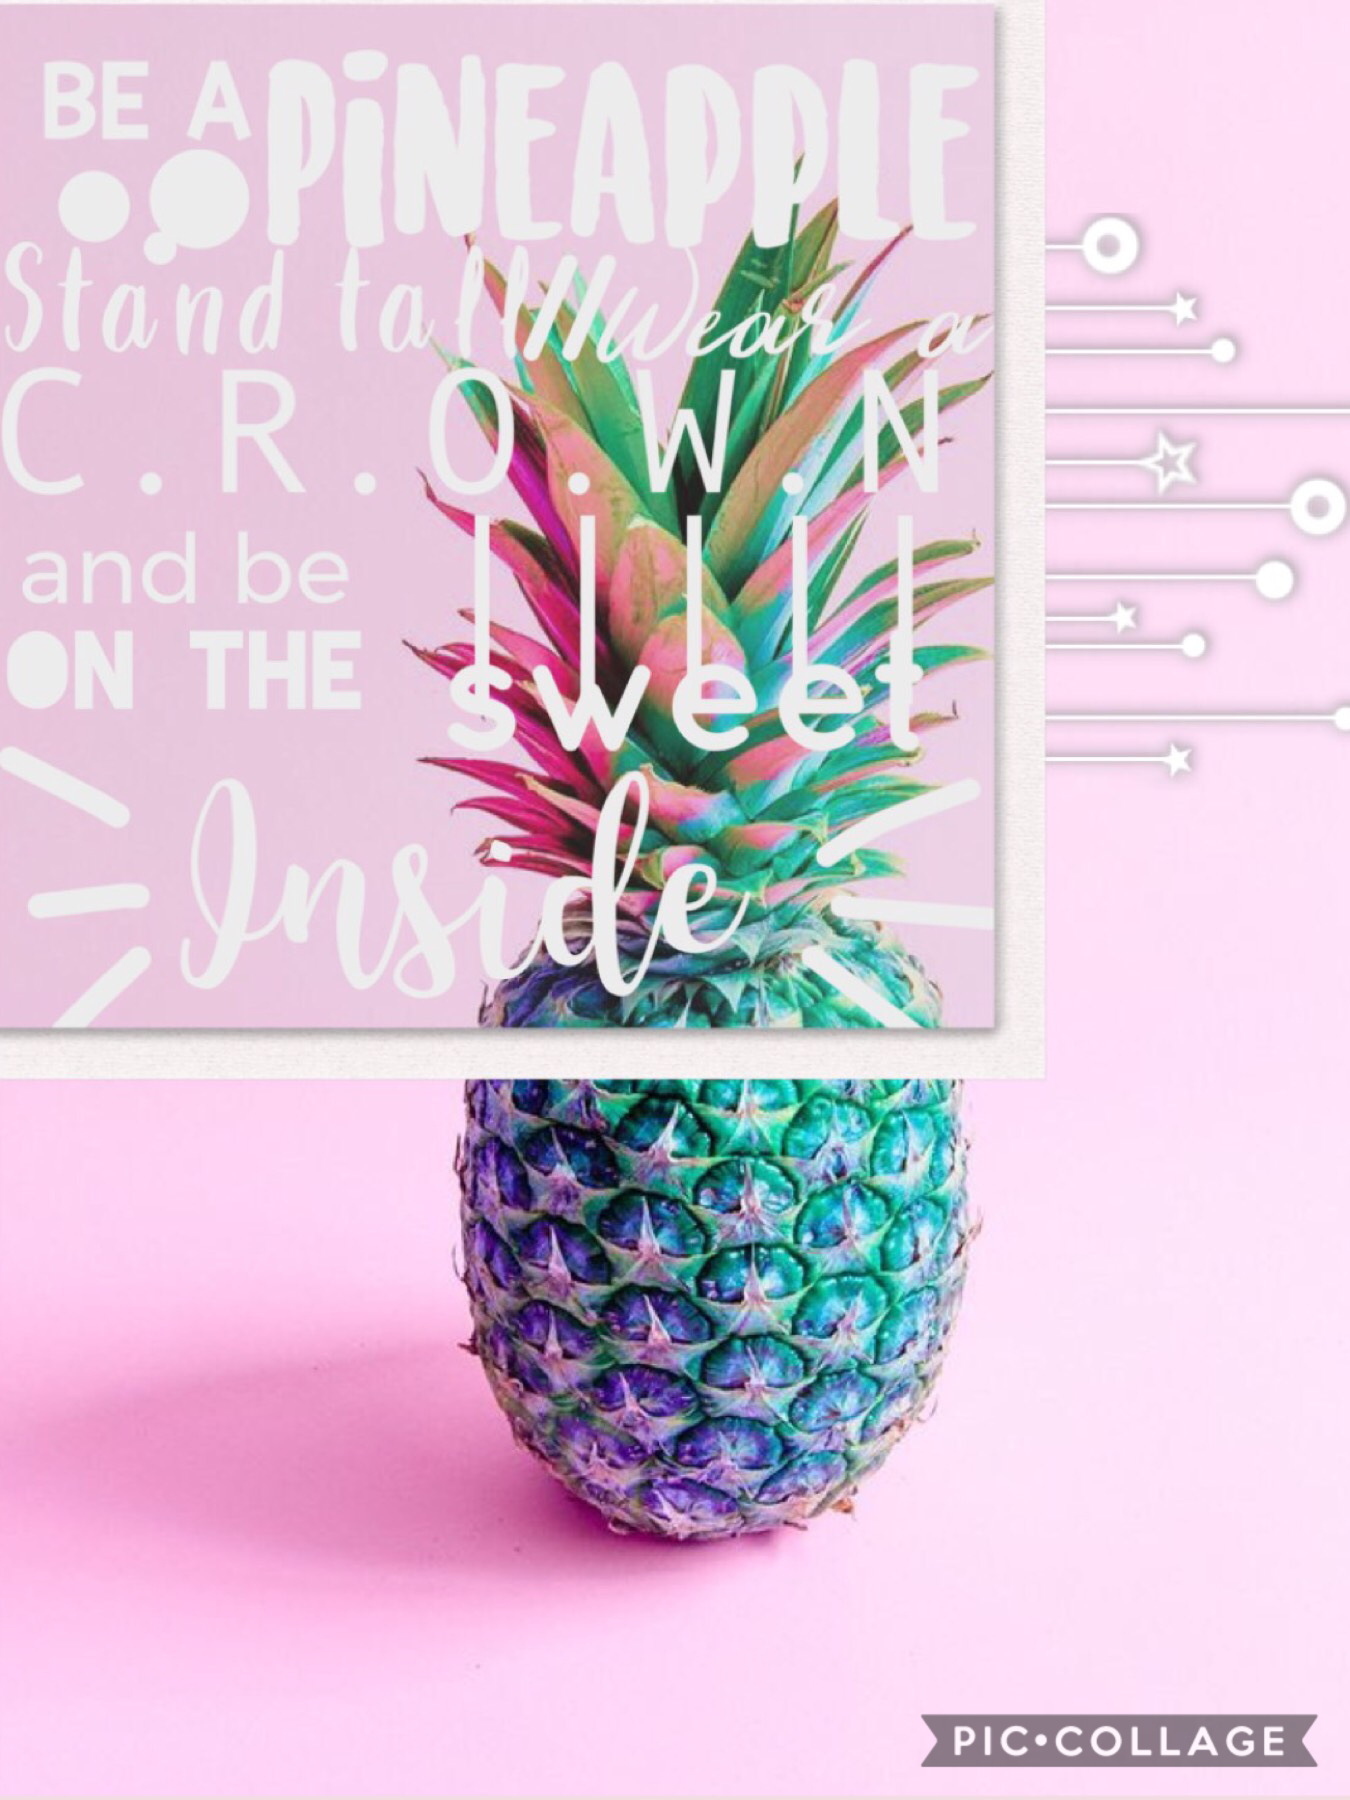 I loveee pineapples 🍍 tap
Who likes pineapples??
Found that I’ve made watermelon and pineapple collages and all of them are all of my fav fruits!